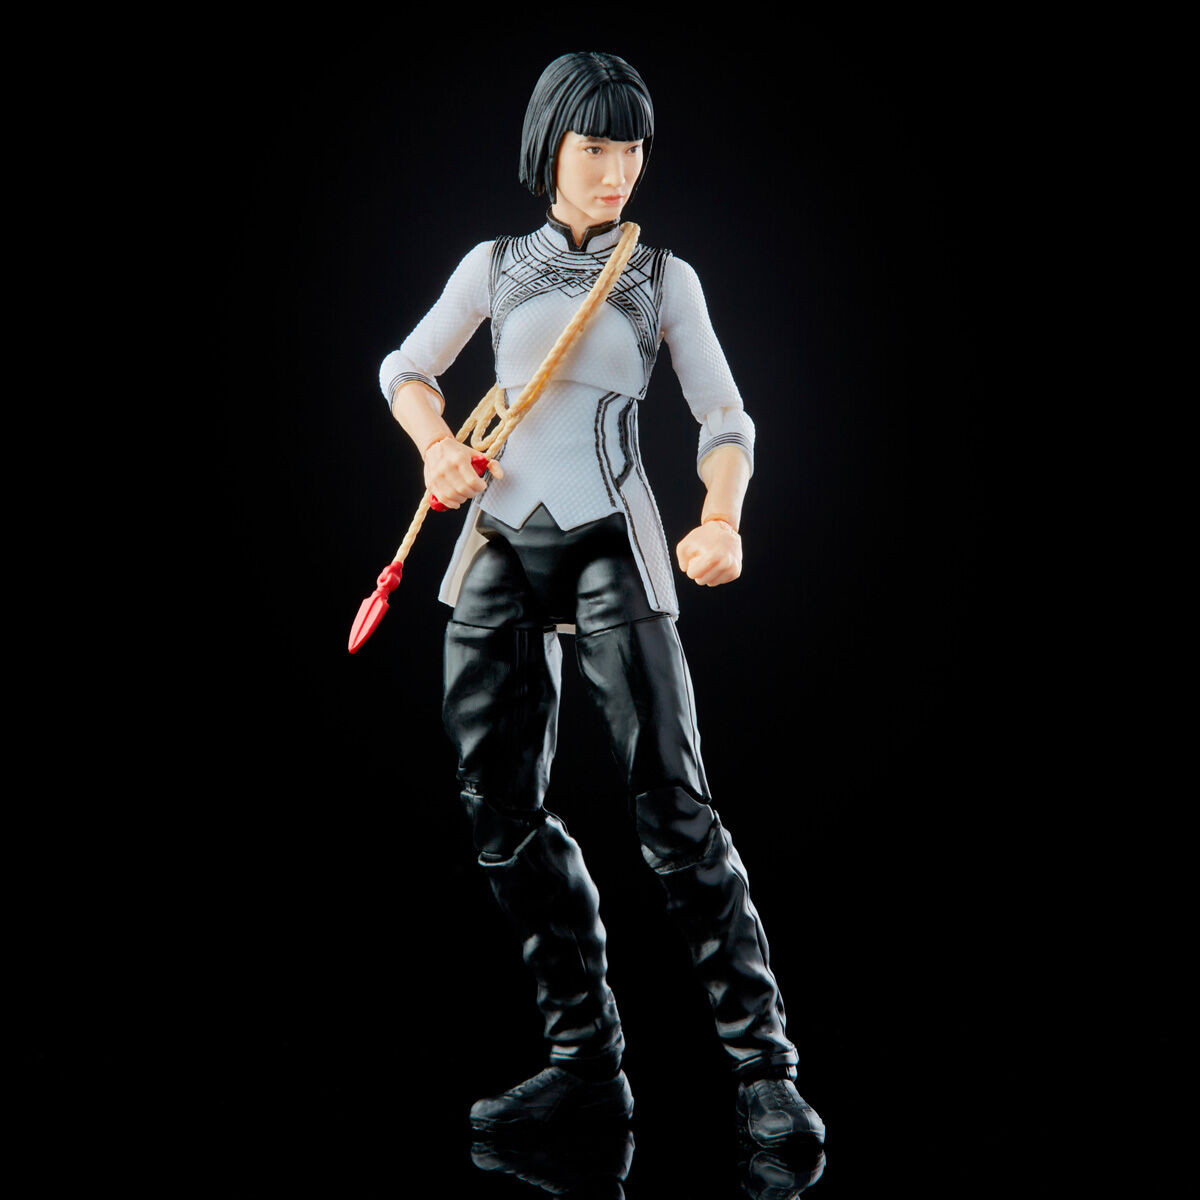 Figura Xialing Shang-Chi and the Legend of the Ten Rings Marvel 15cm HASBRO - 6